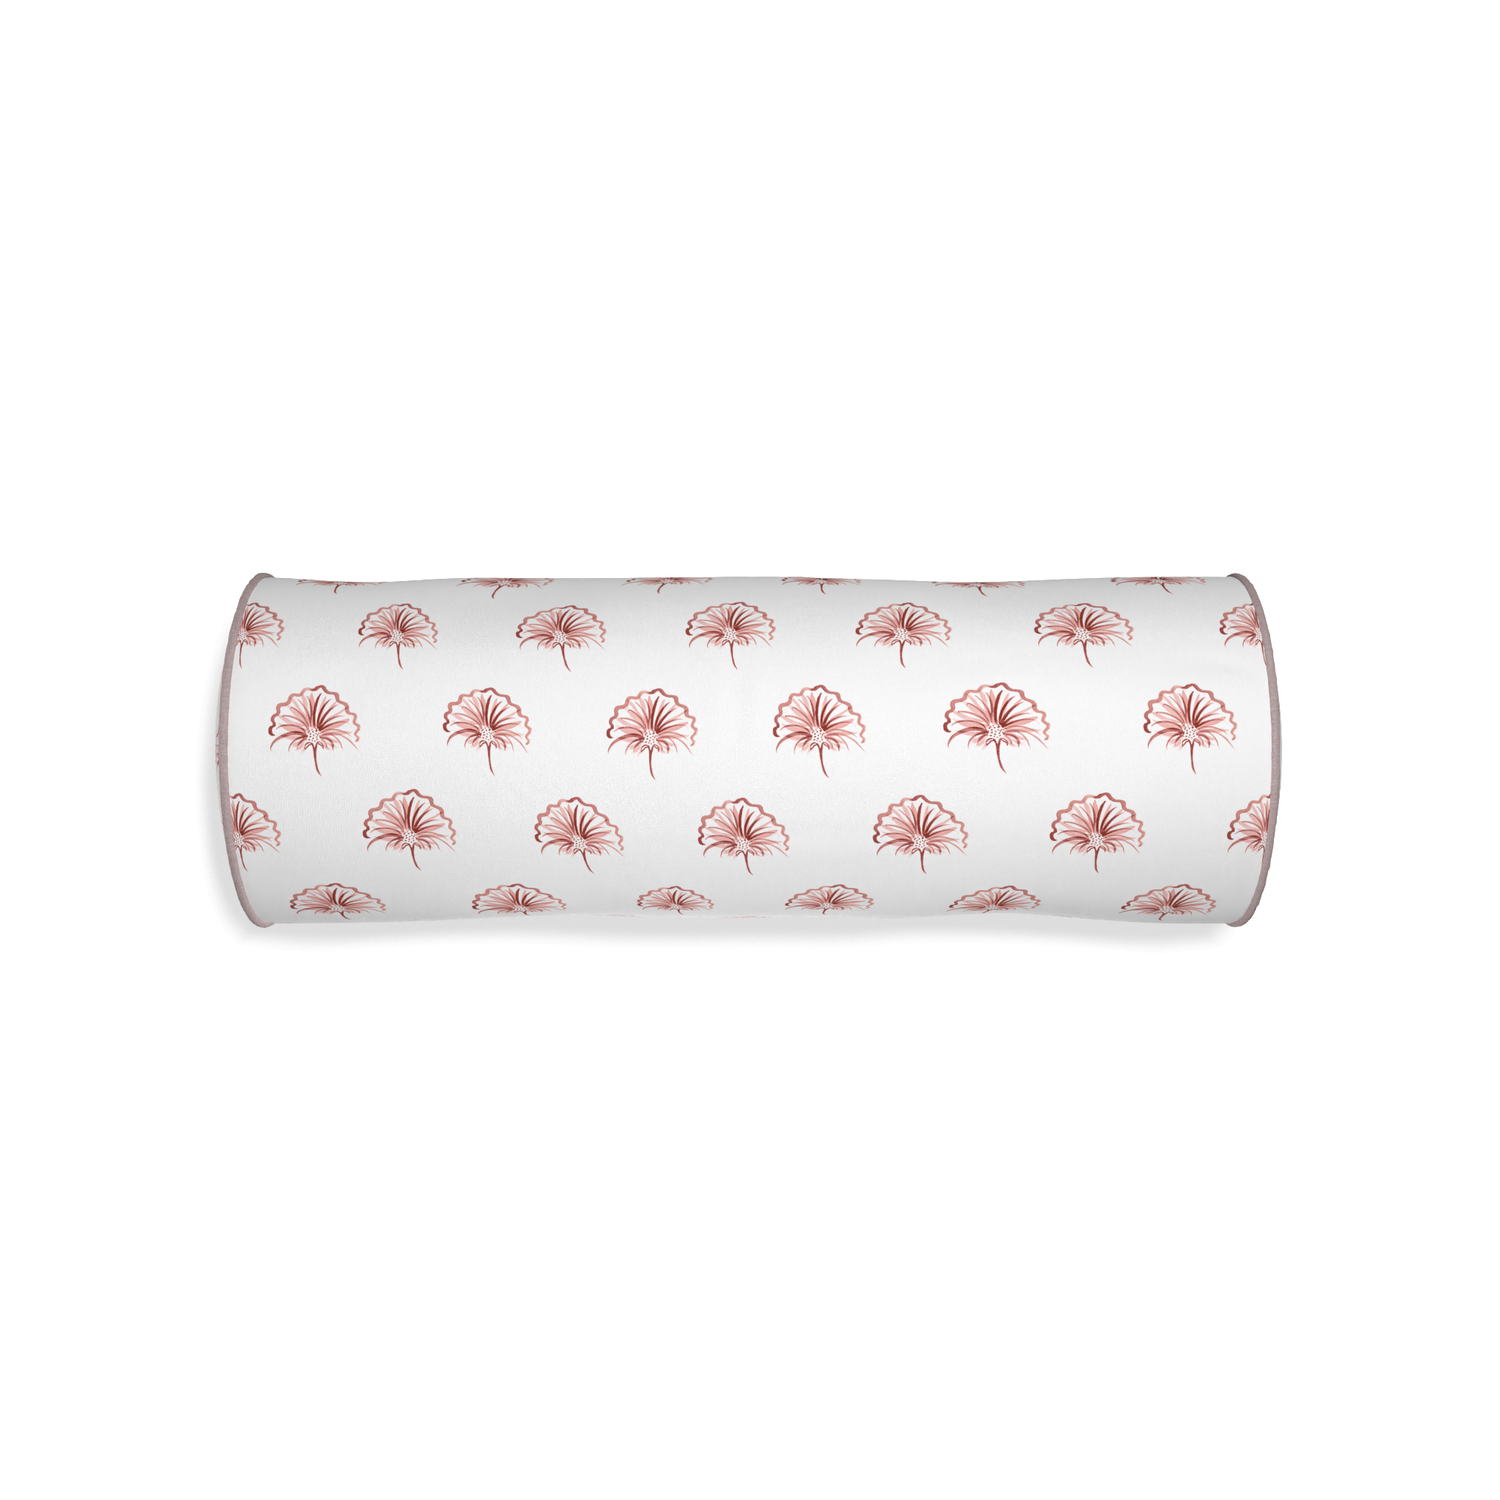 Bolster penelope rose custom floral pinkpillow with orchid piping on white background